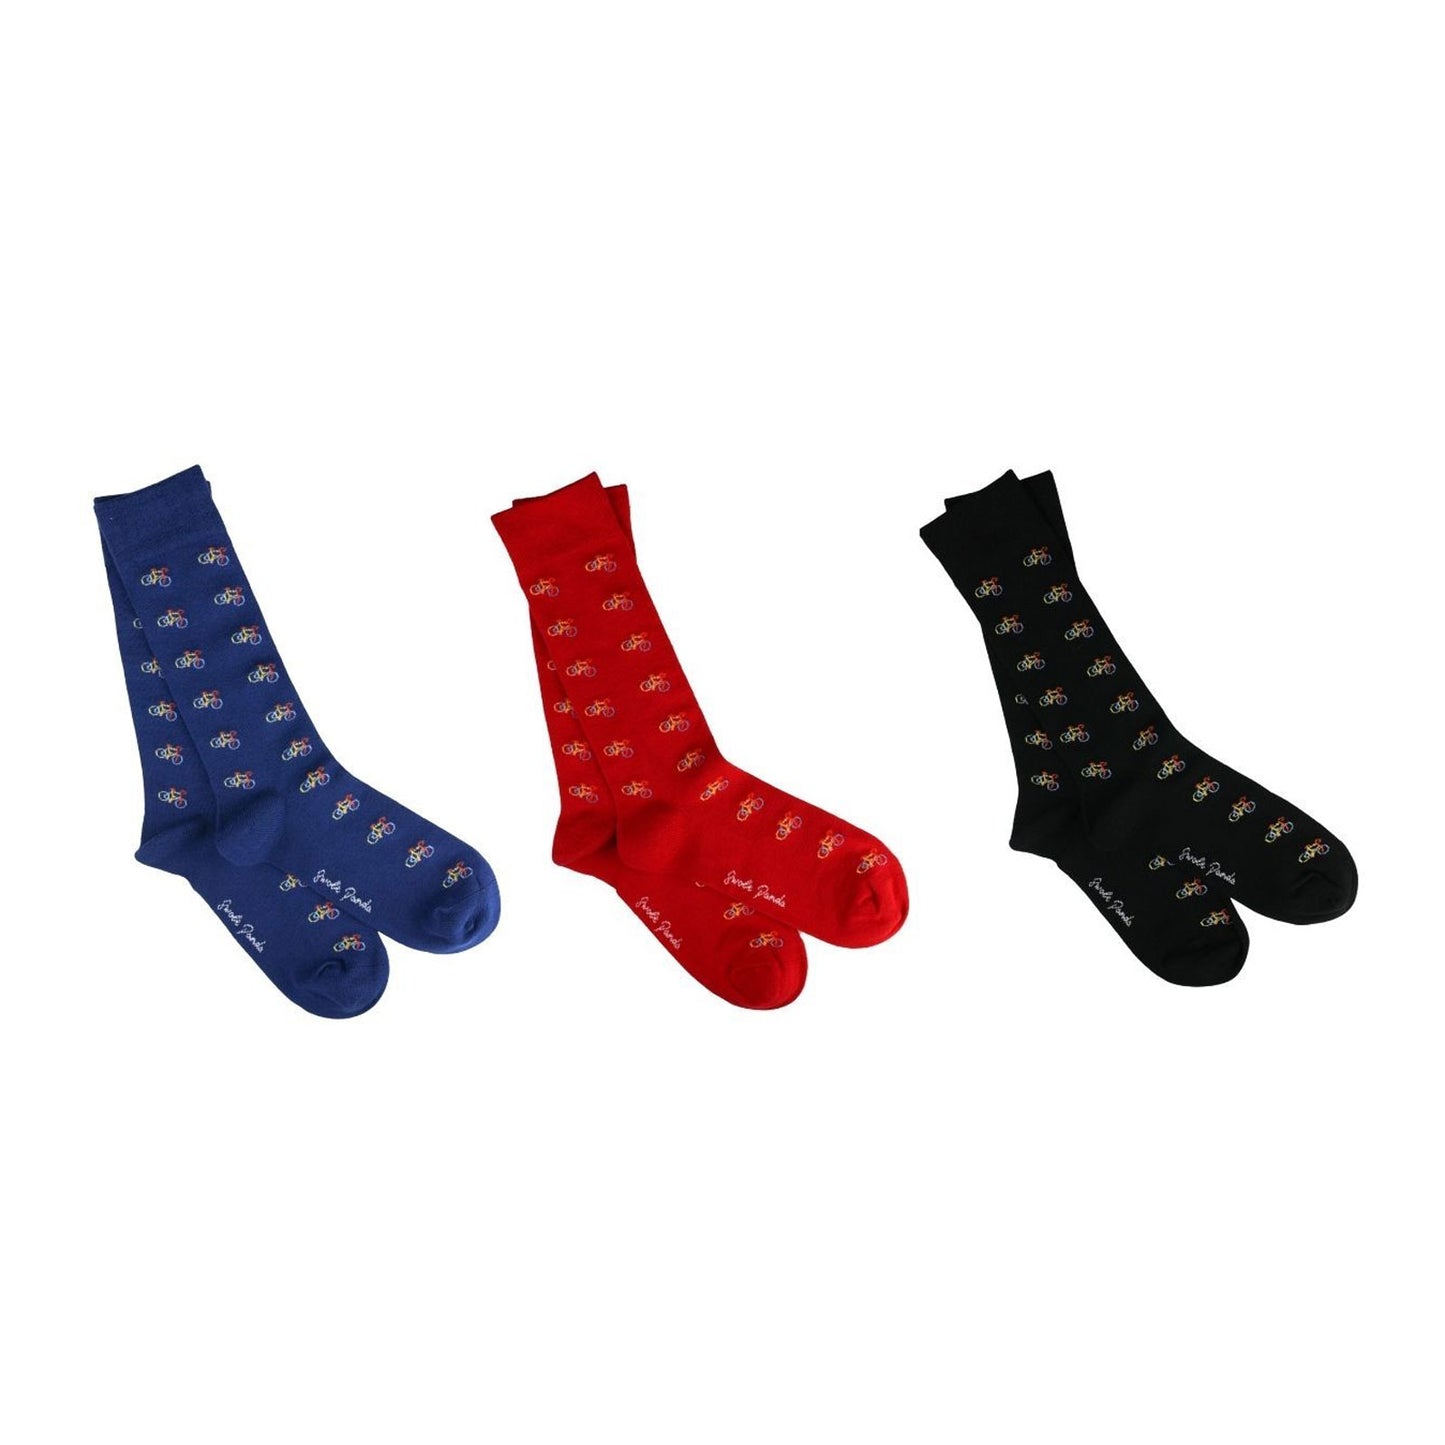 Bicycle Bamboo Socks, Set of 3 with Box